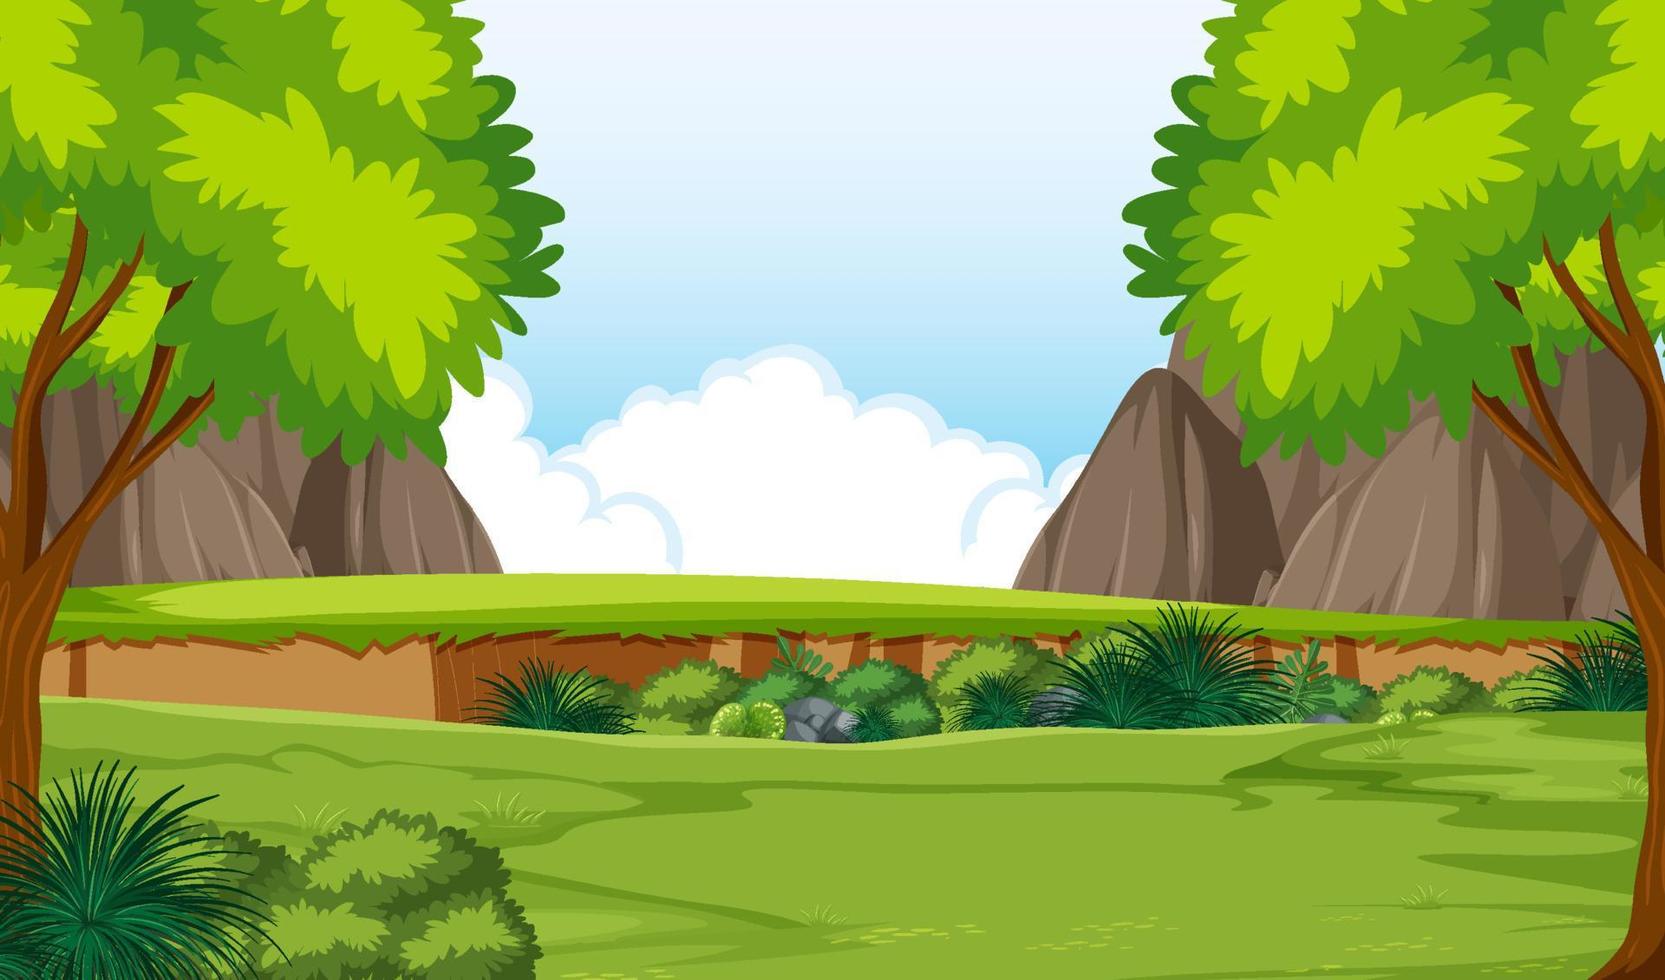 Nature scene with trees and fields vector